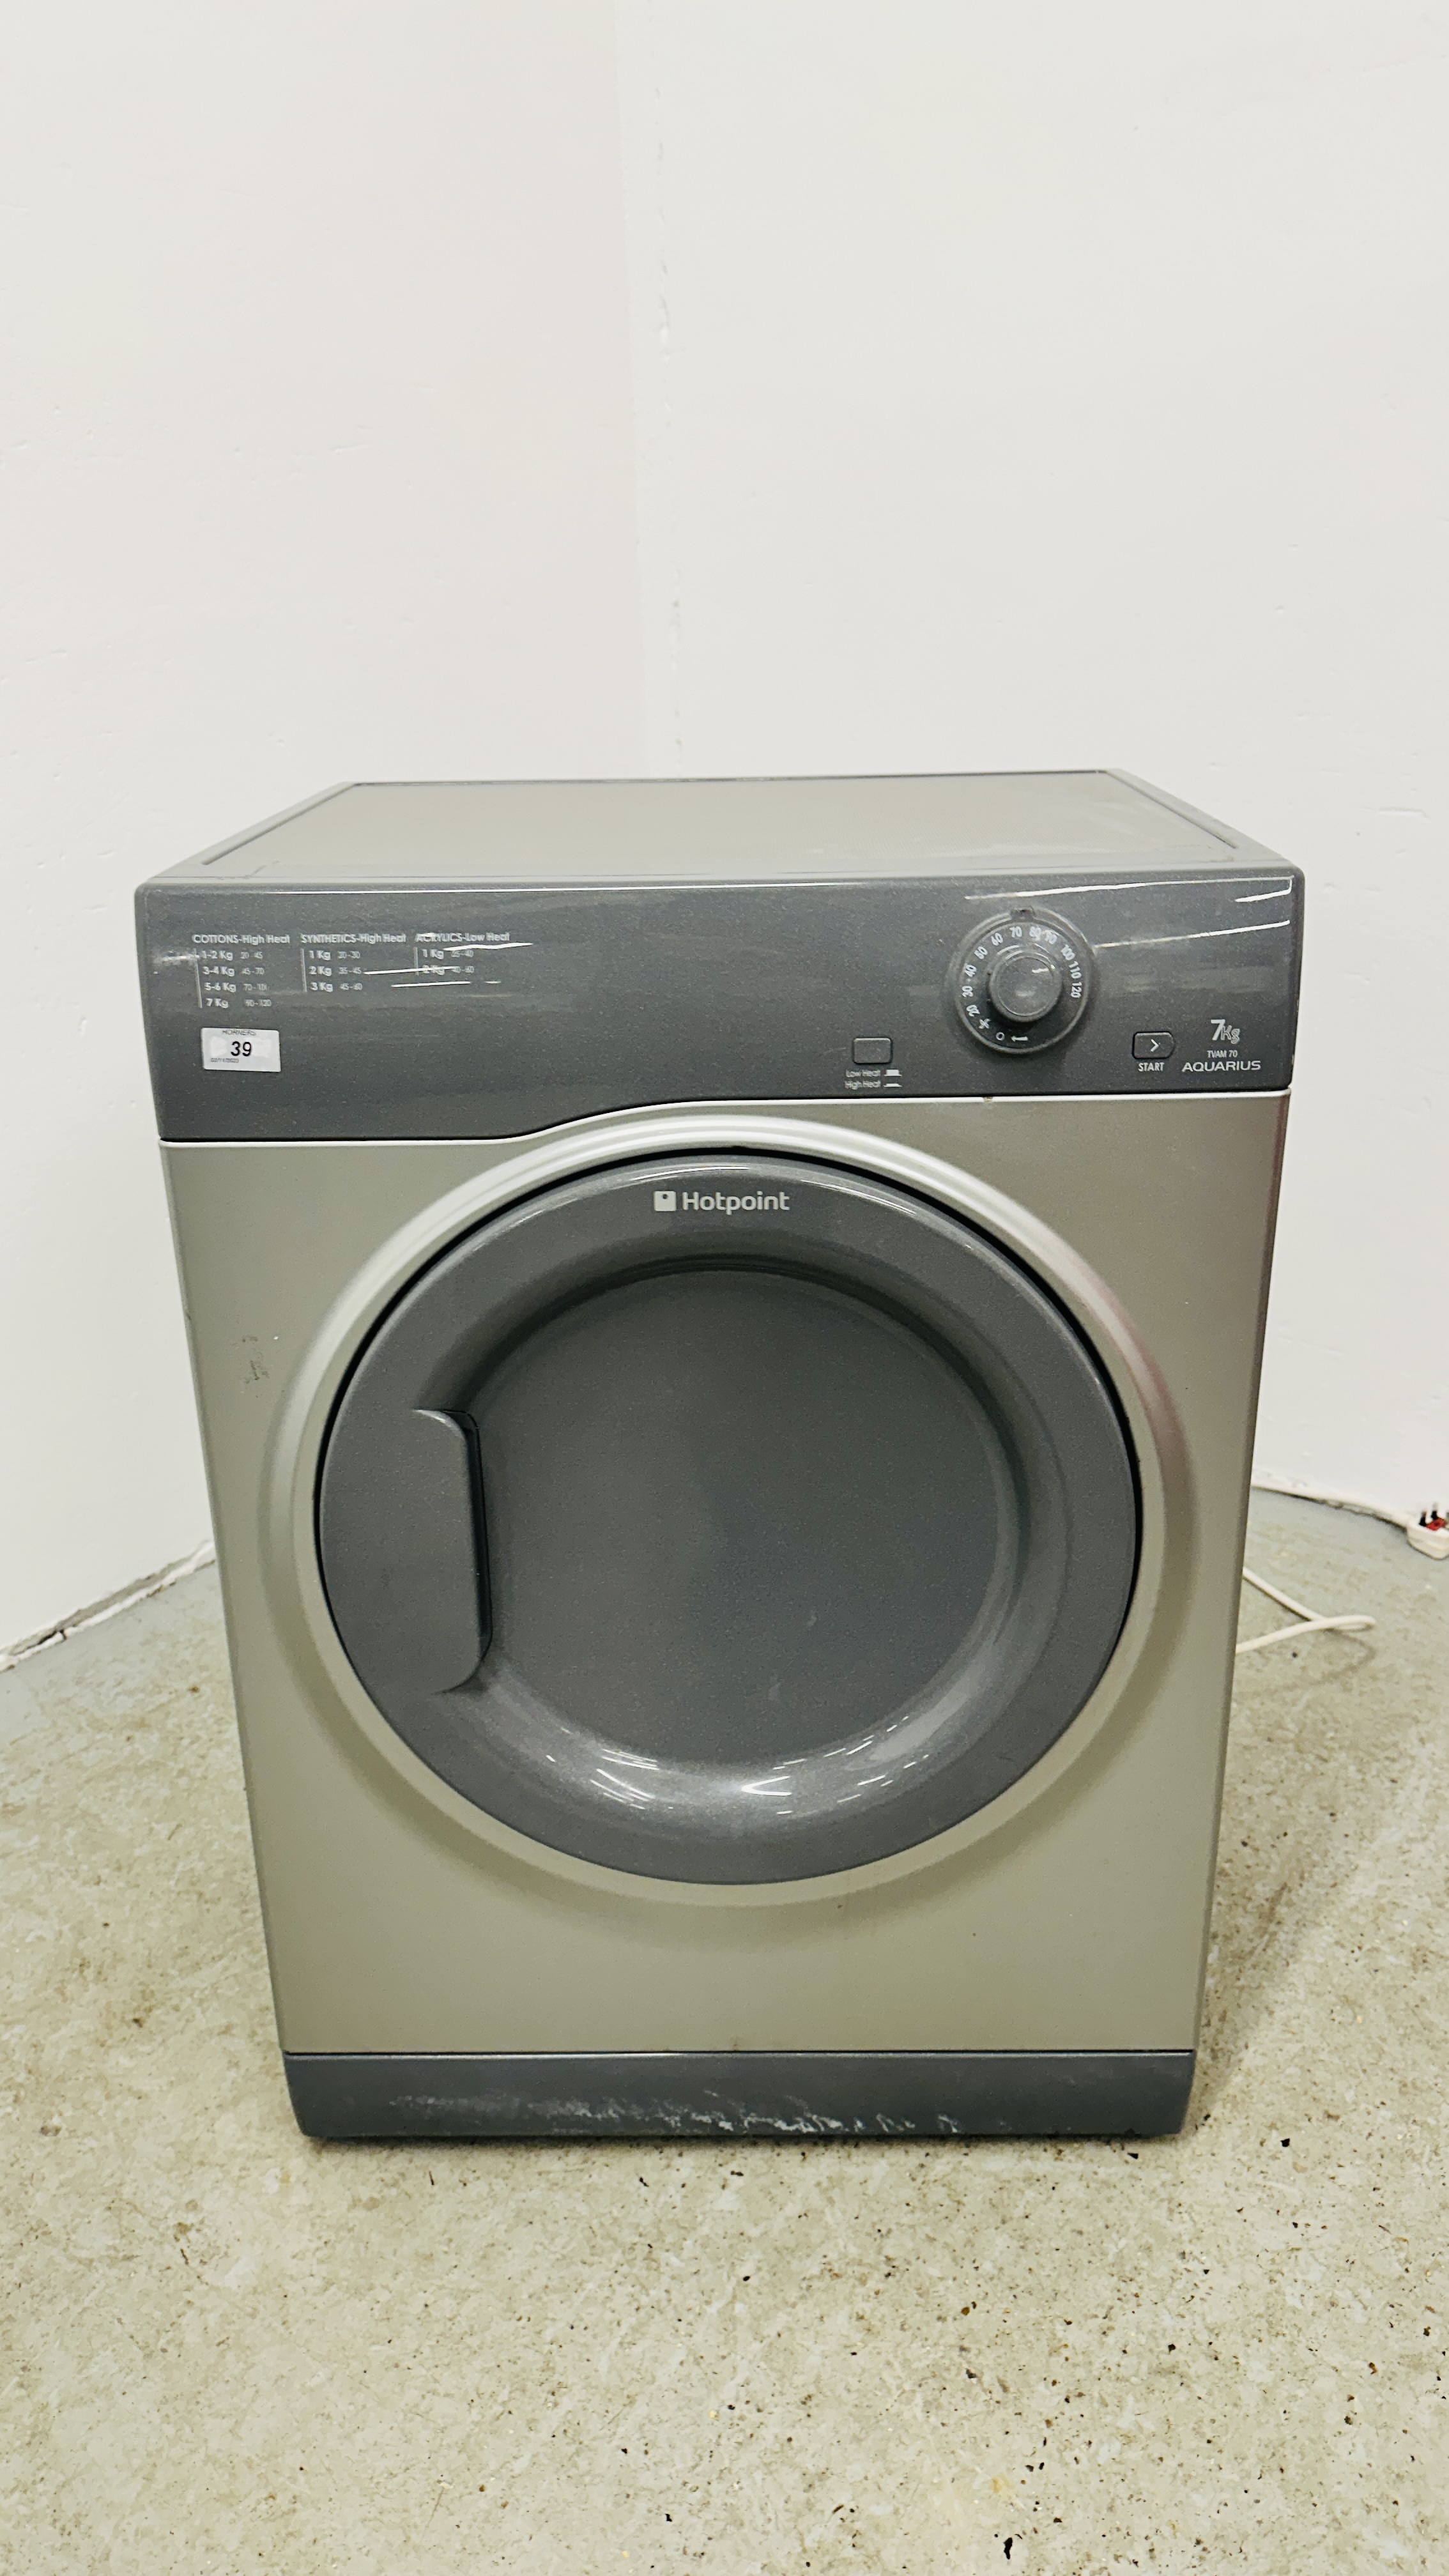 HOTPOINT AQUARIUS 7KG TUMBLE DRYER, SILVER FINISH - SOLD AS SEEN. - Image 4 of 6